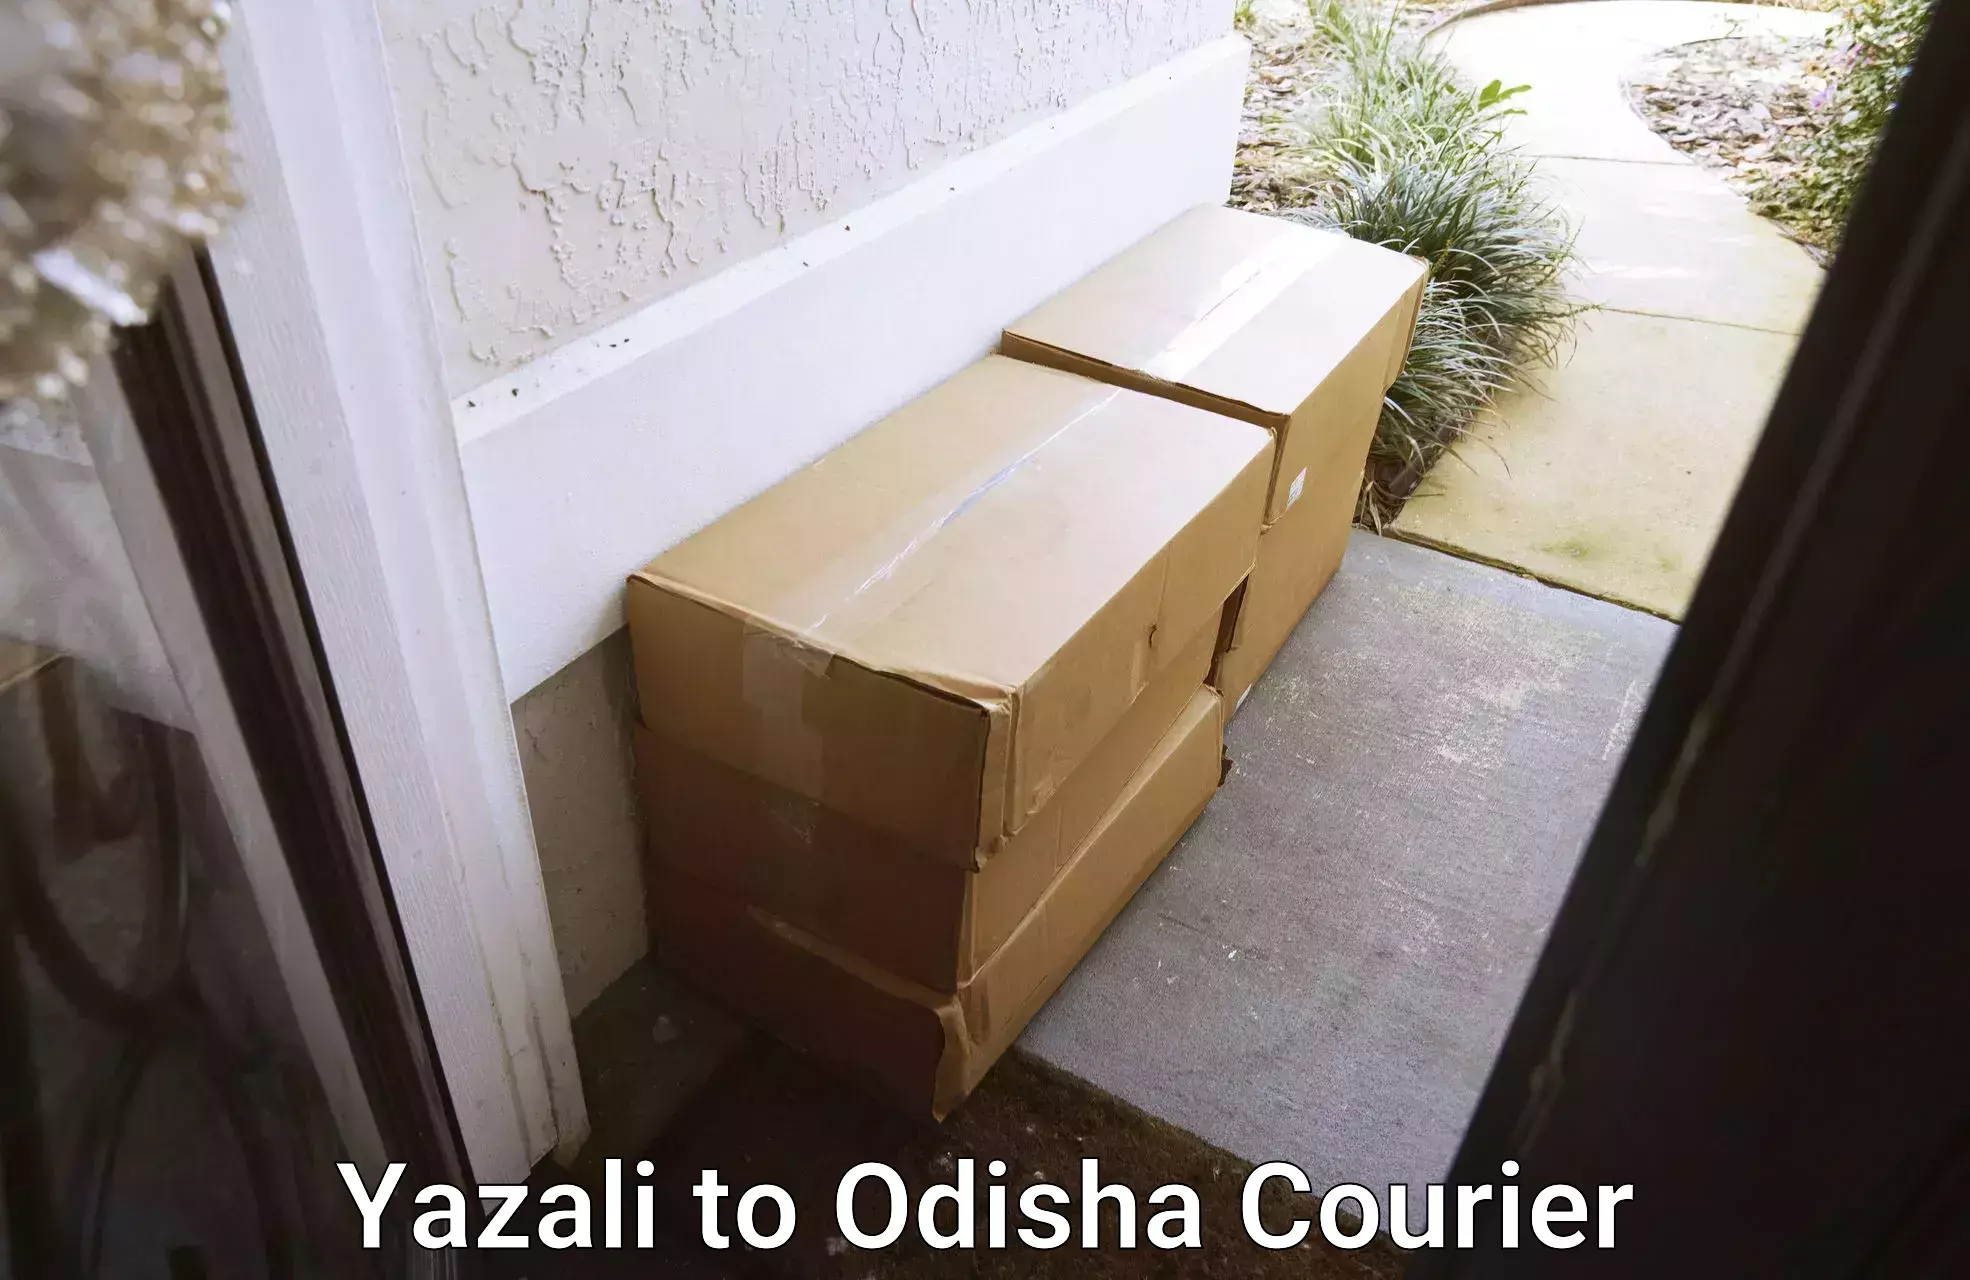 Air courier services in Yazali to Odisha